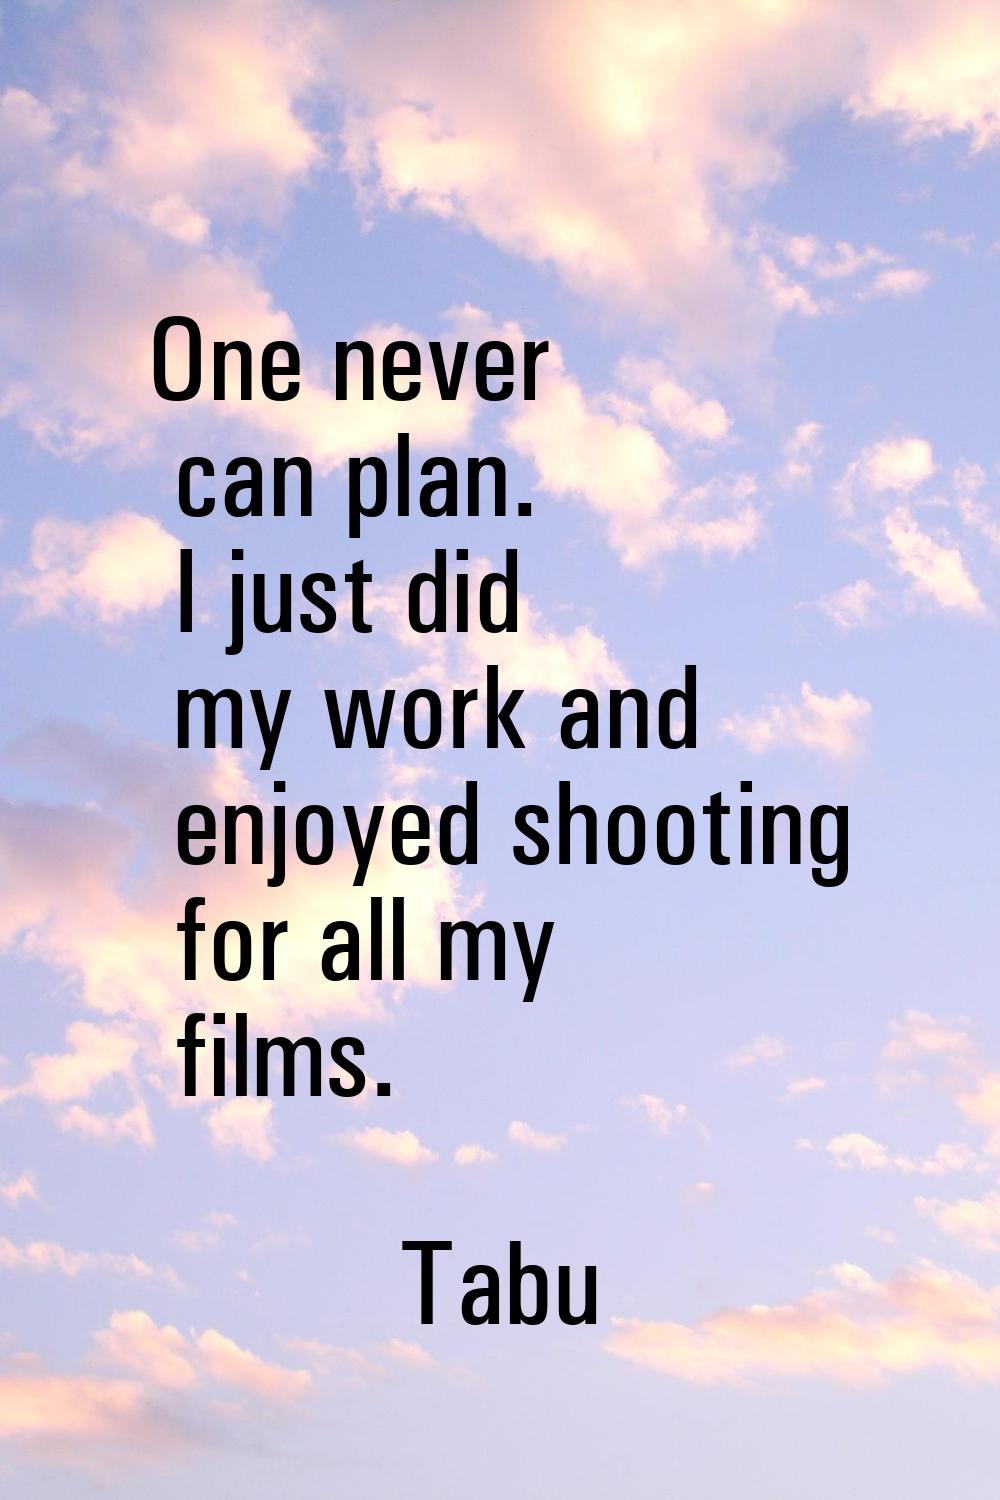 One never can plan. I just did my work and enjoyed shooting for all my films.